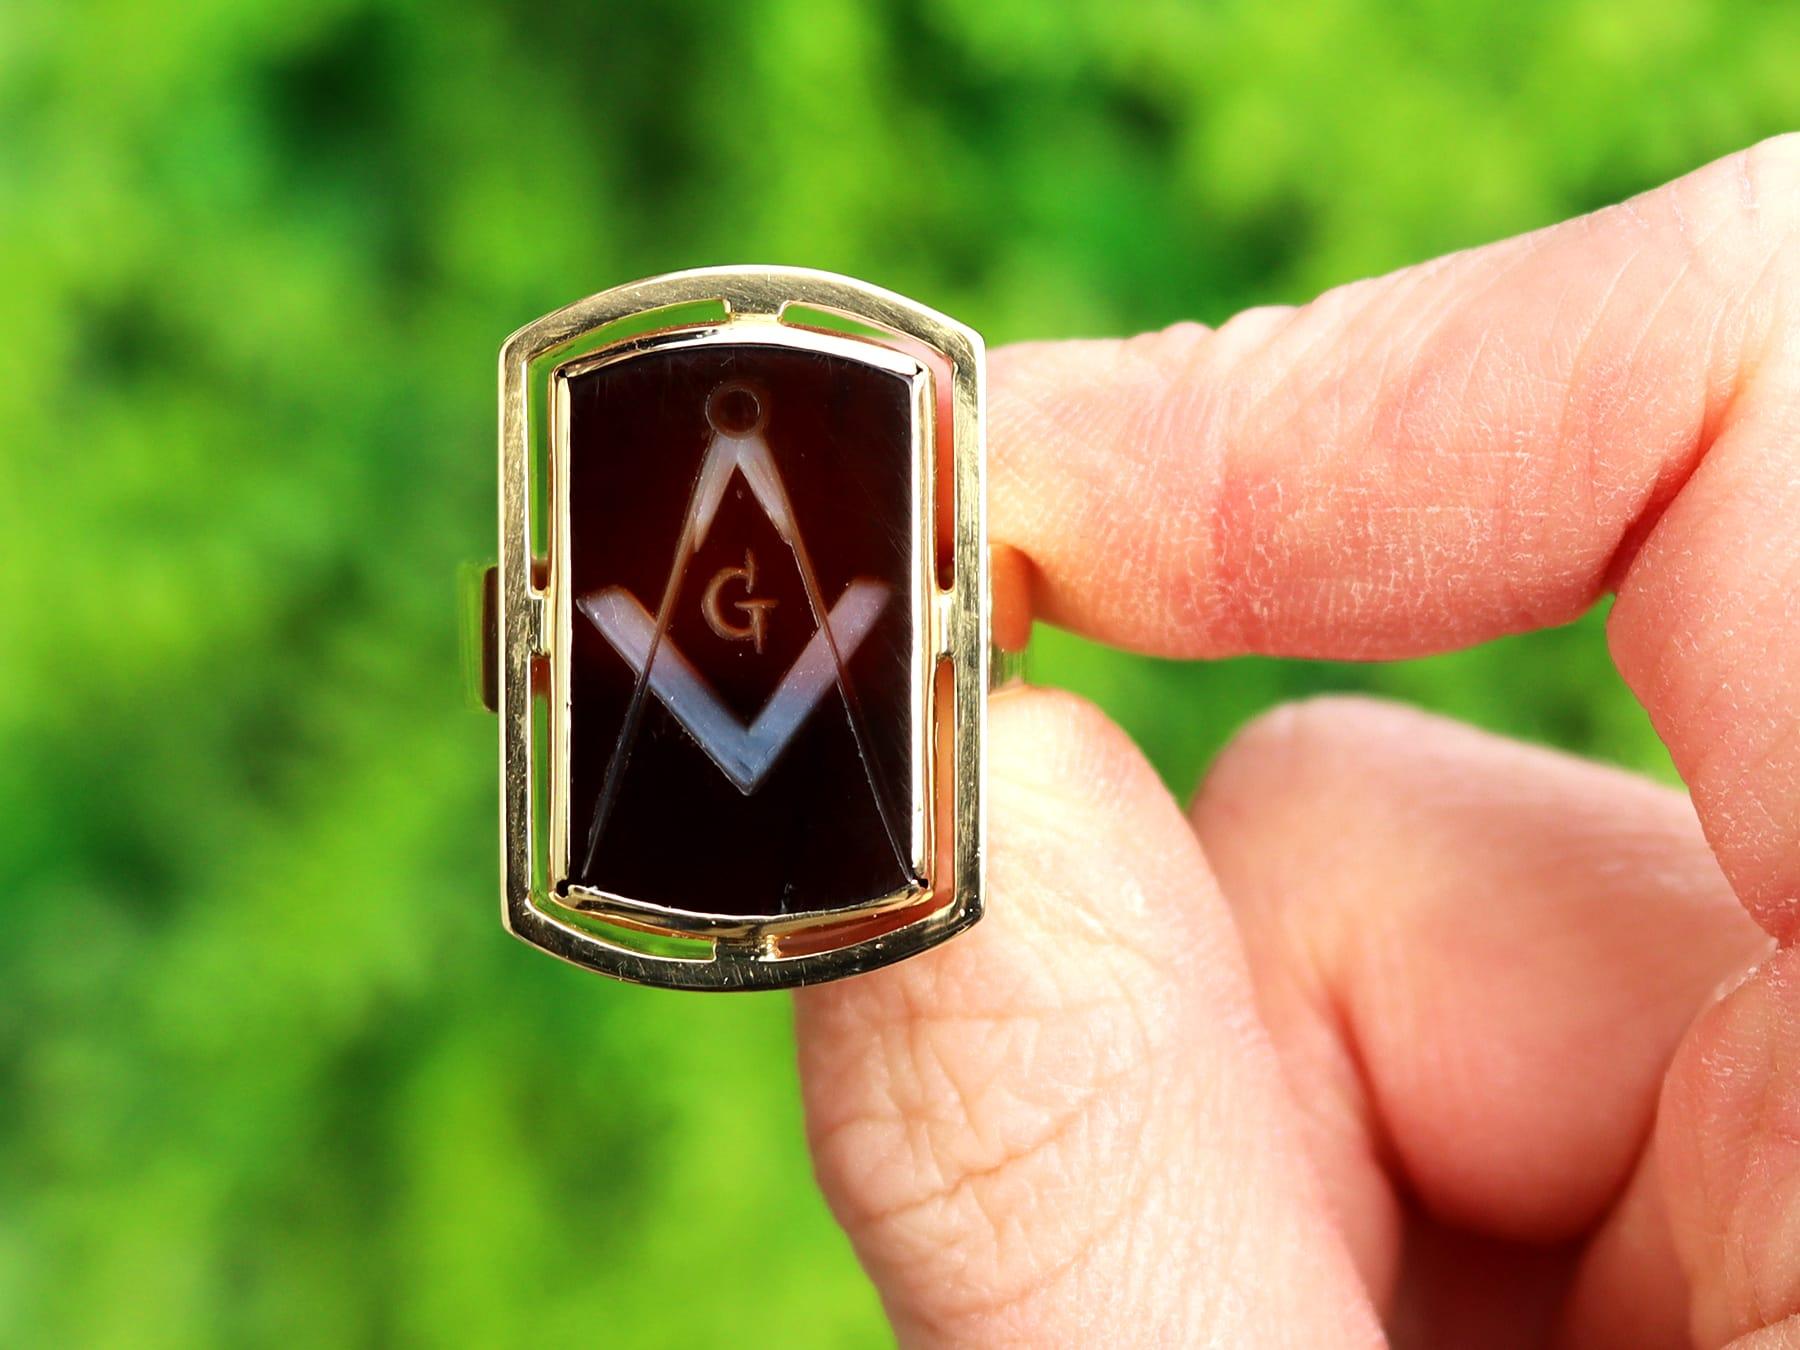 A stunning, fine and impressive, large vintage 1950s 3.31 carat carved agate and 18 karat yellow gold Masonic ring; part of our diverse antique jewelry and estate jewelry collections

This stunning vintage ring has been crafted in 18k yellow